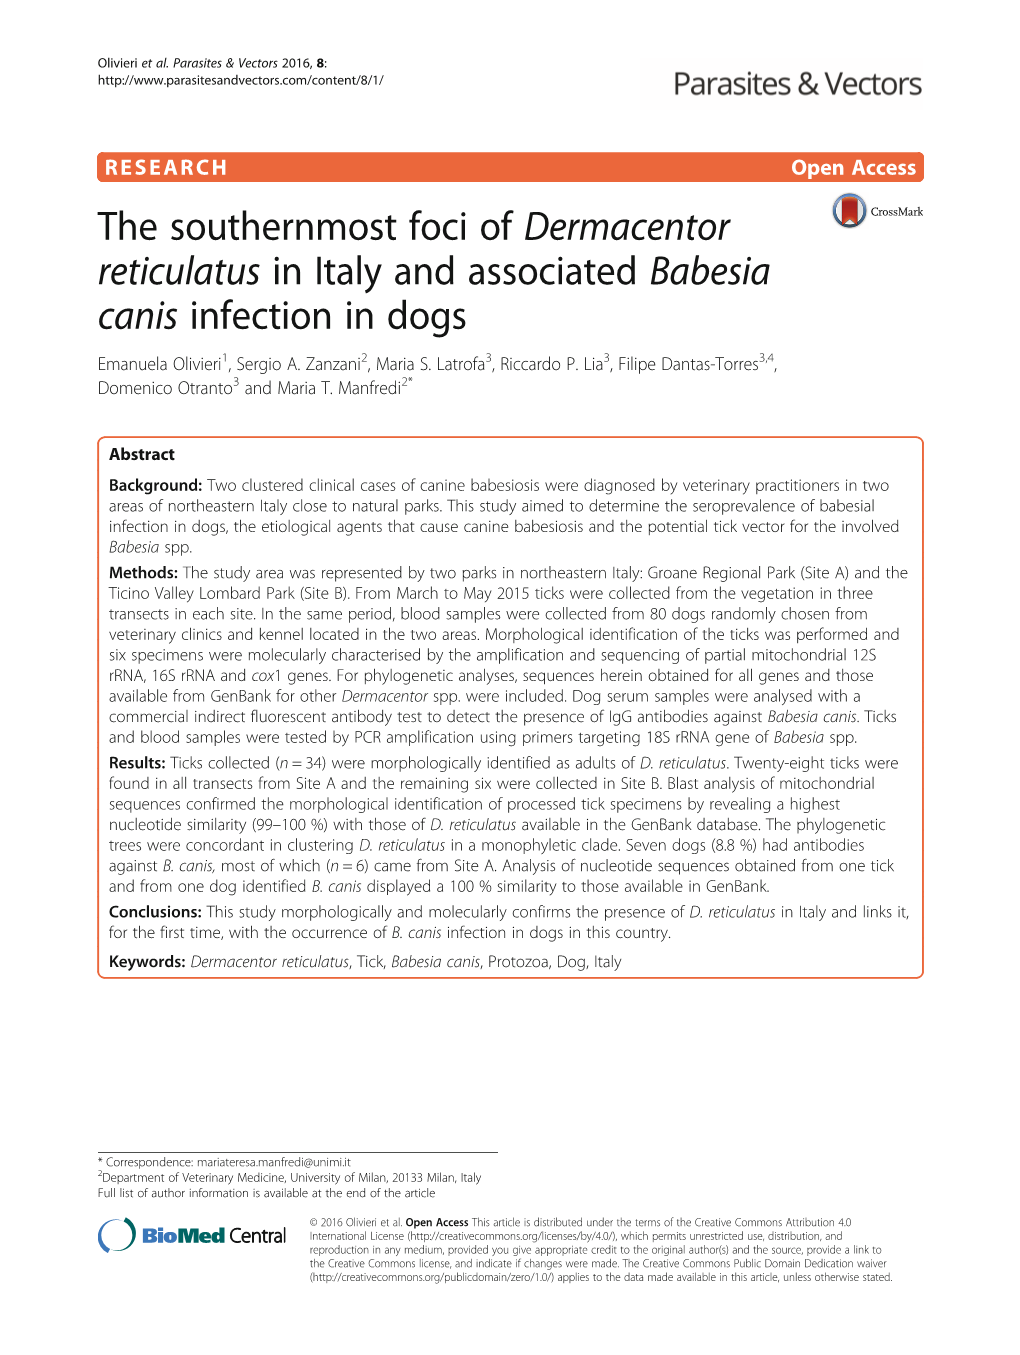 The Southernmost Foci of Dermacentor Reticulatus in Italy and Associated Babesia Canis Infection in Dogs Emanuela Olivieri1, Sergio A